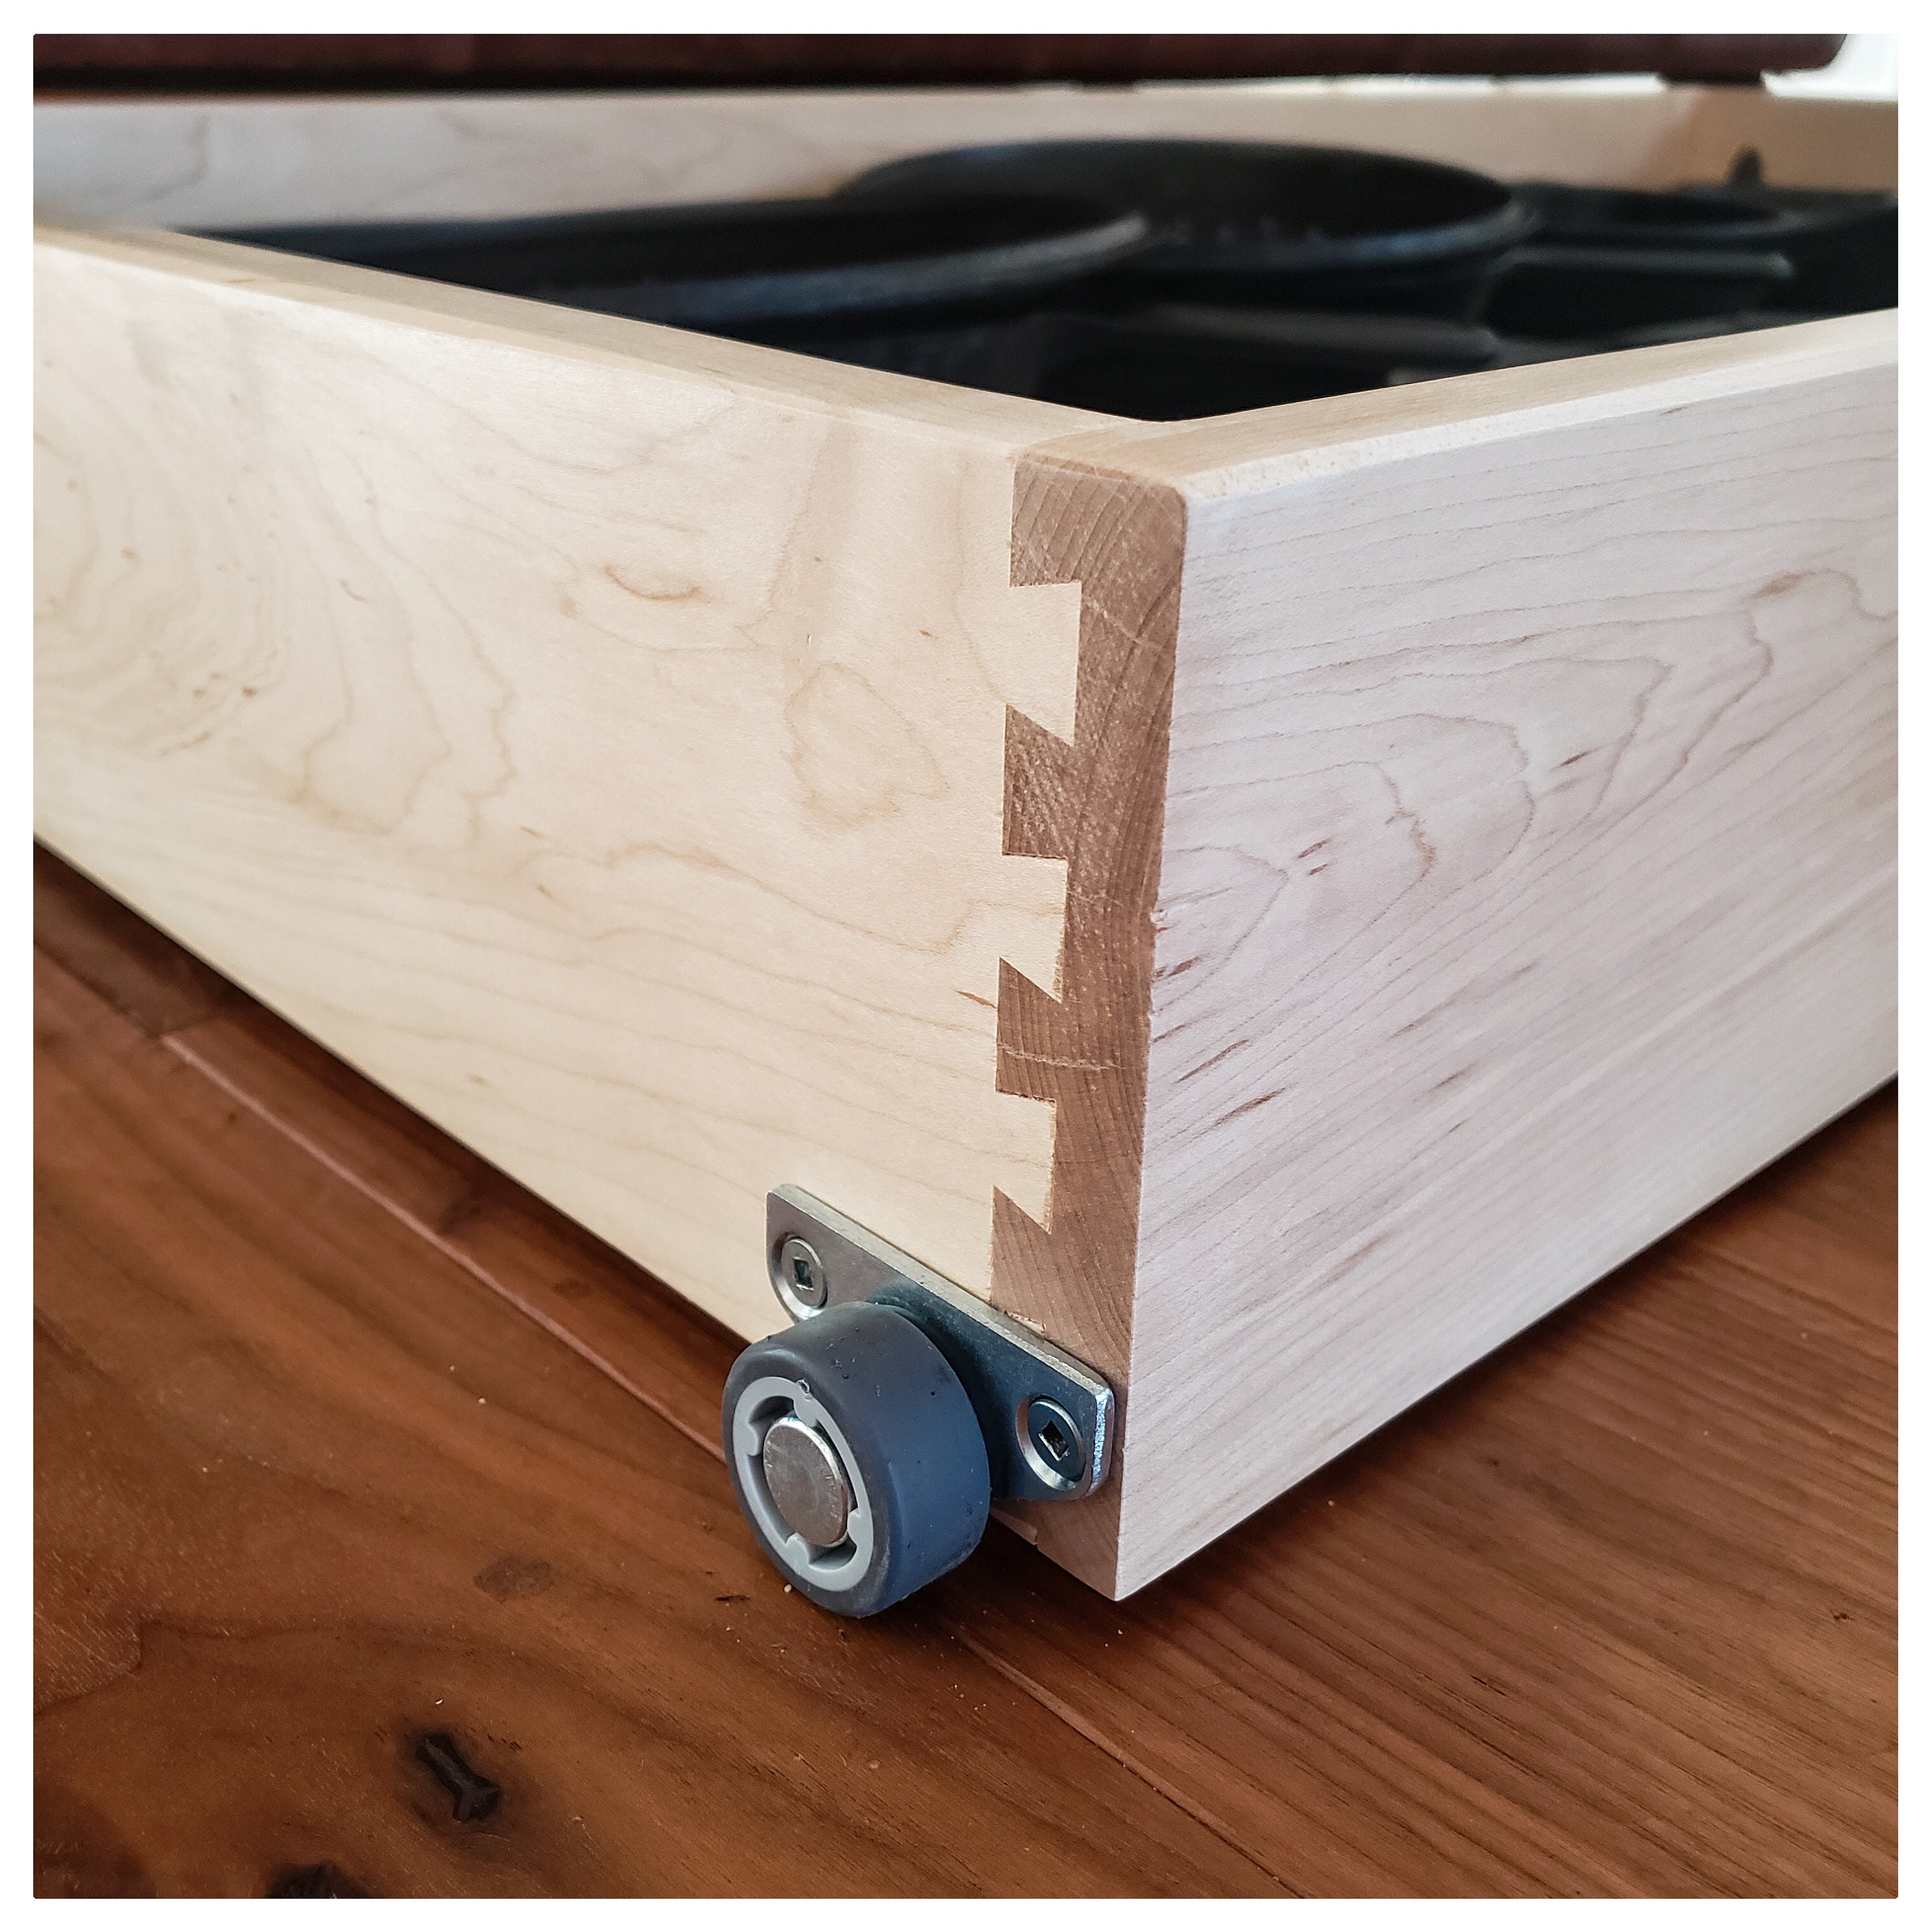 Our Long Under Bed Box with Wheels